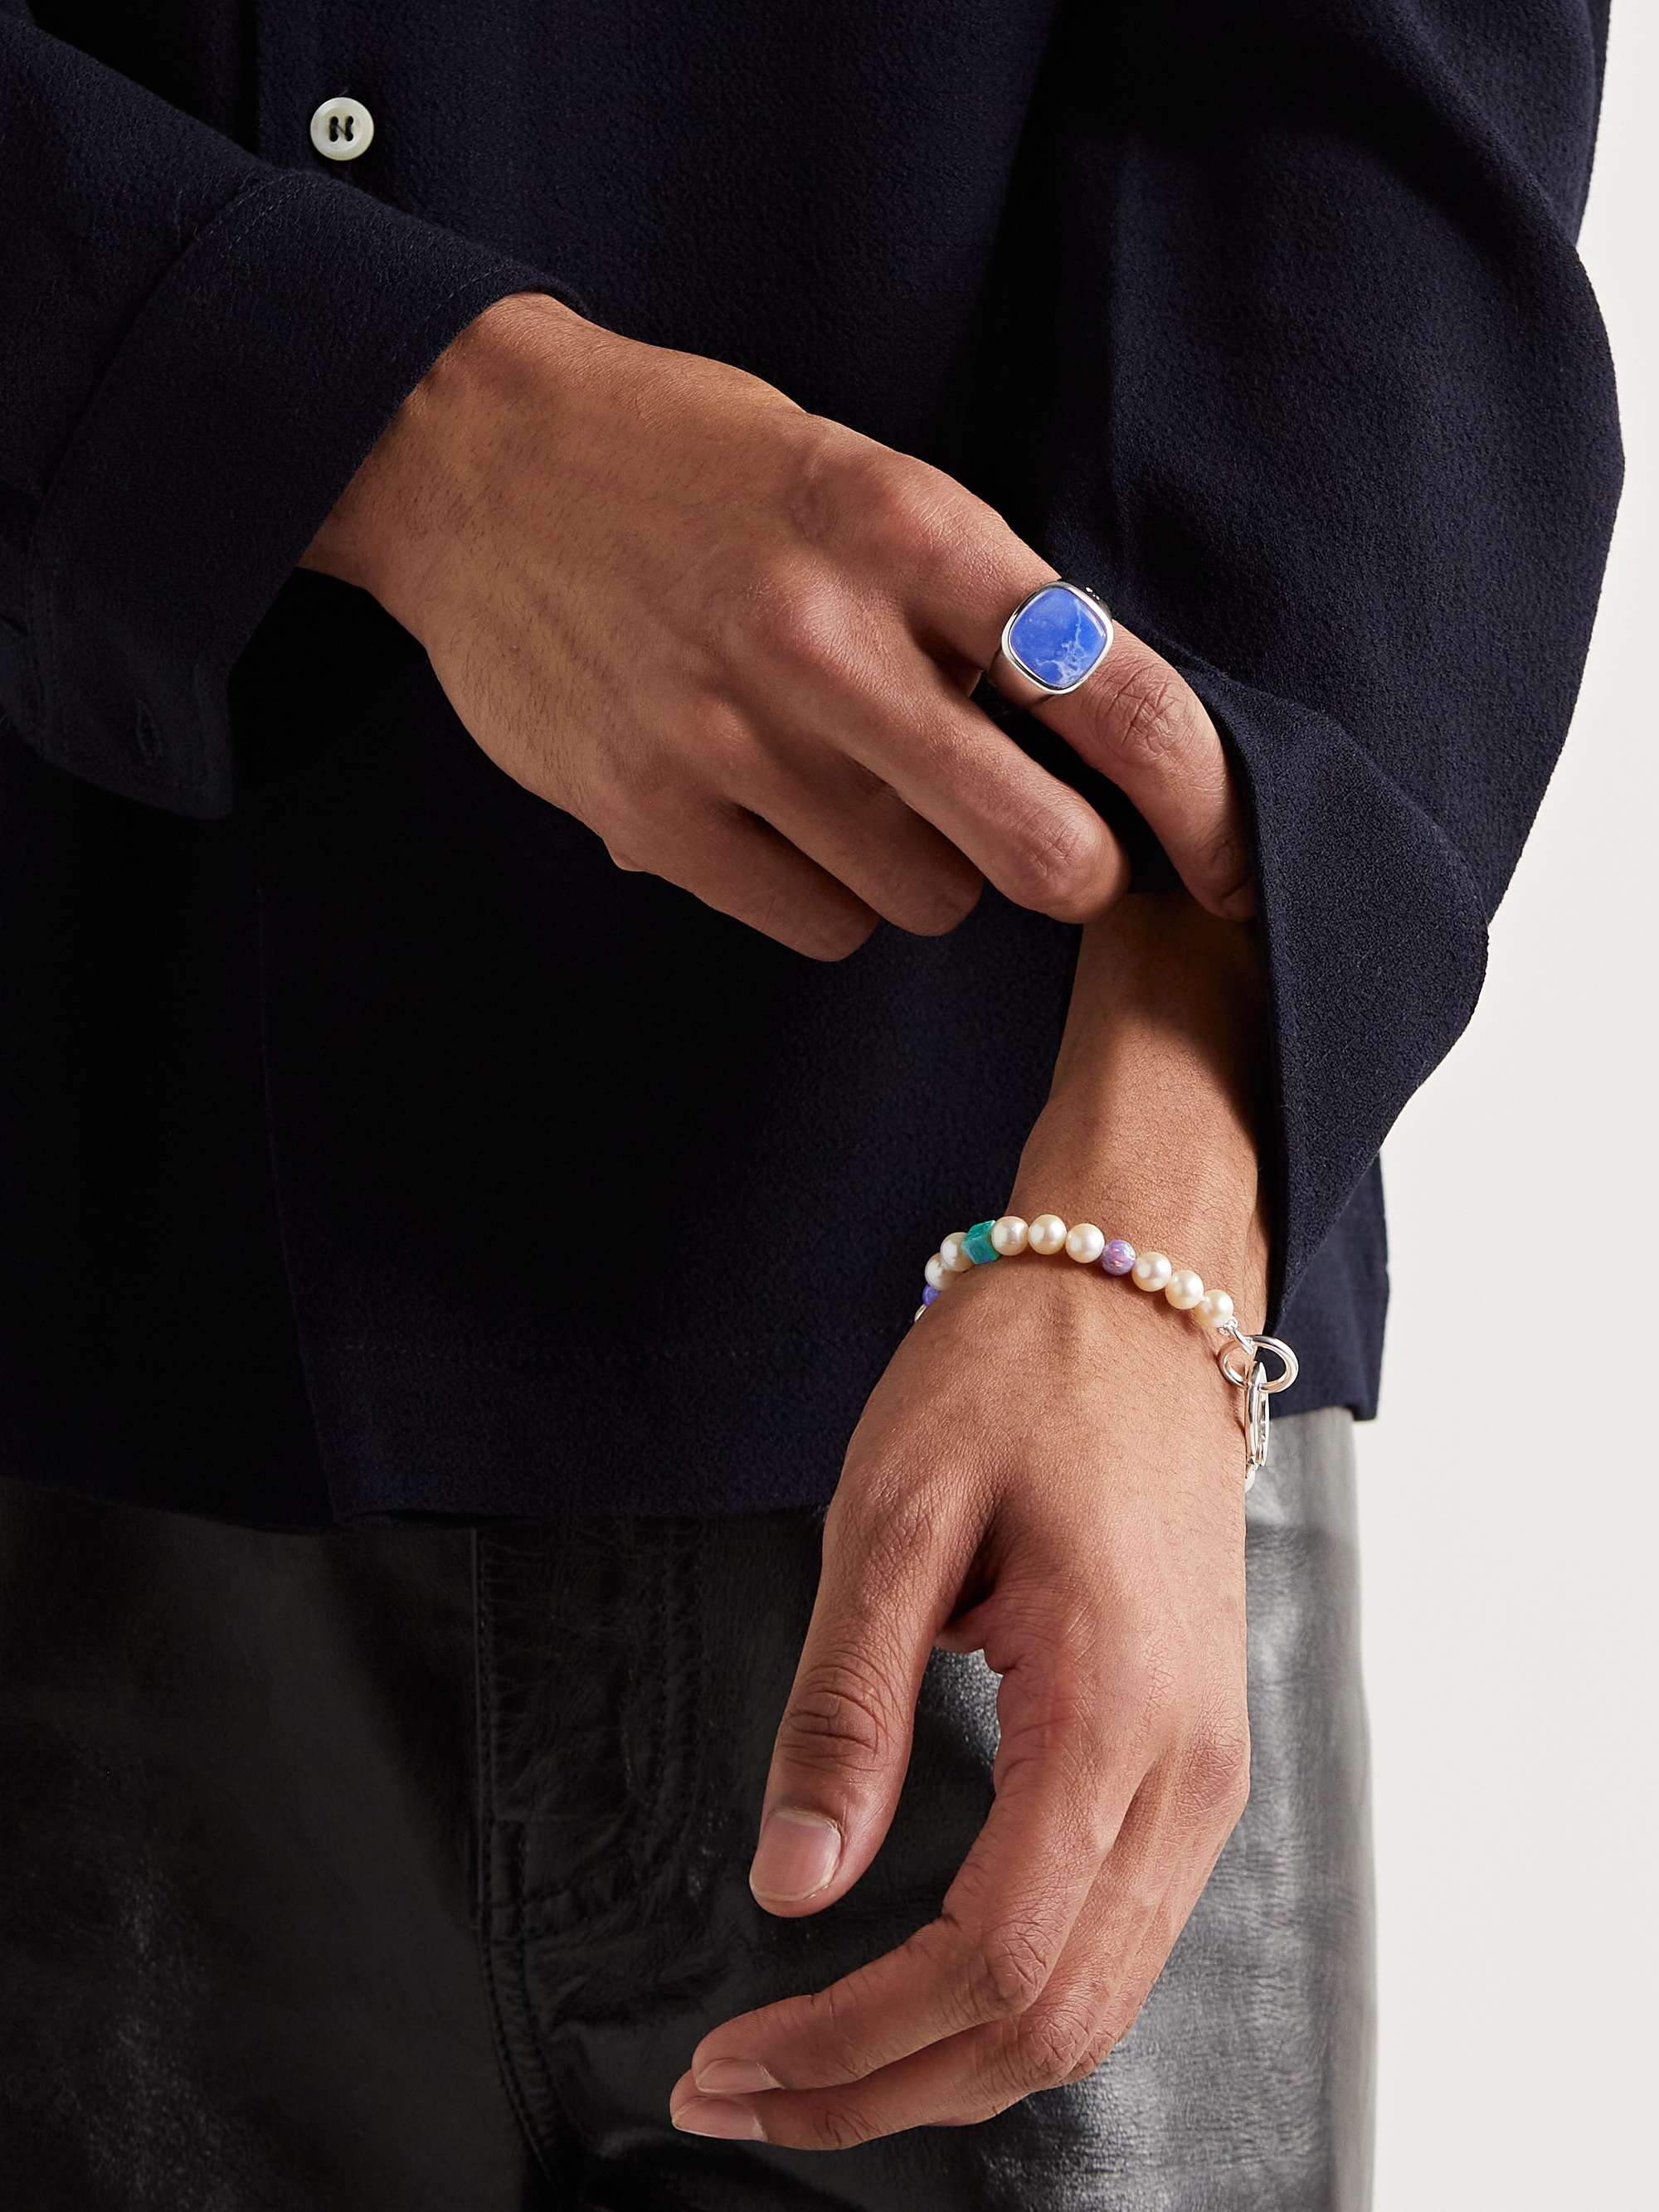 HATTON LABS Ocean Sterling Silver, Resin and Sapphire Signet Ring